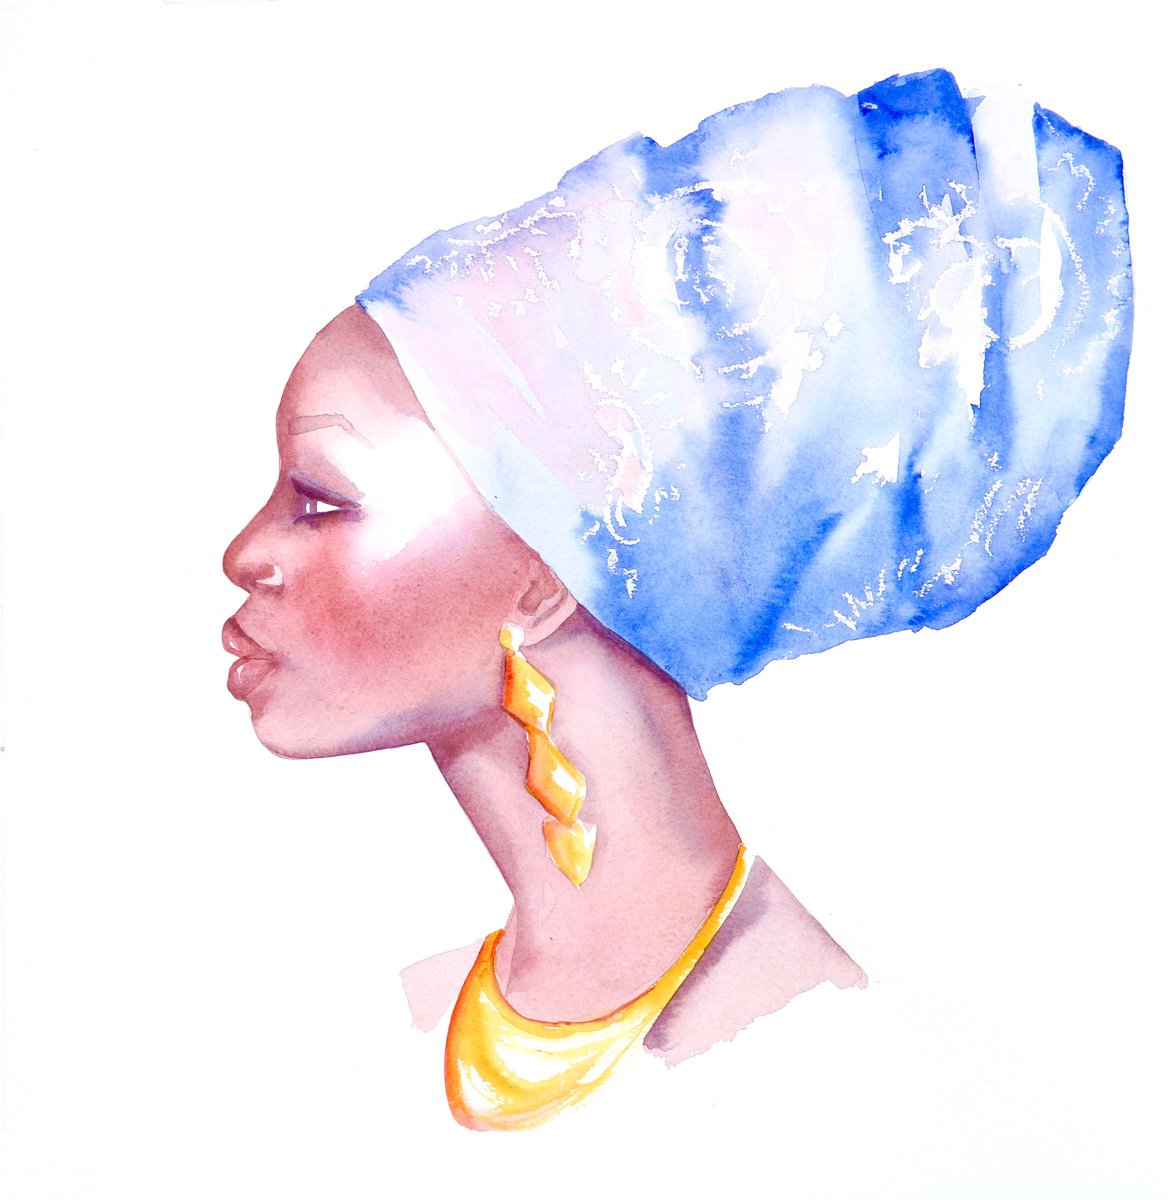 African Beauty by Aimee Del Valle